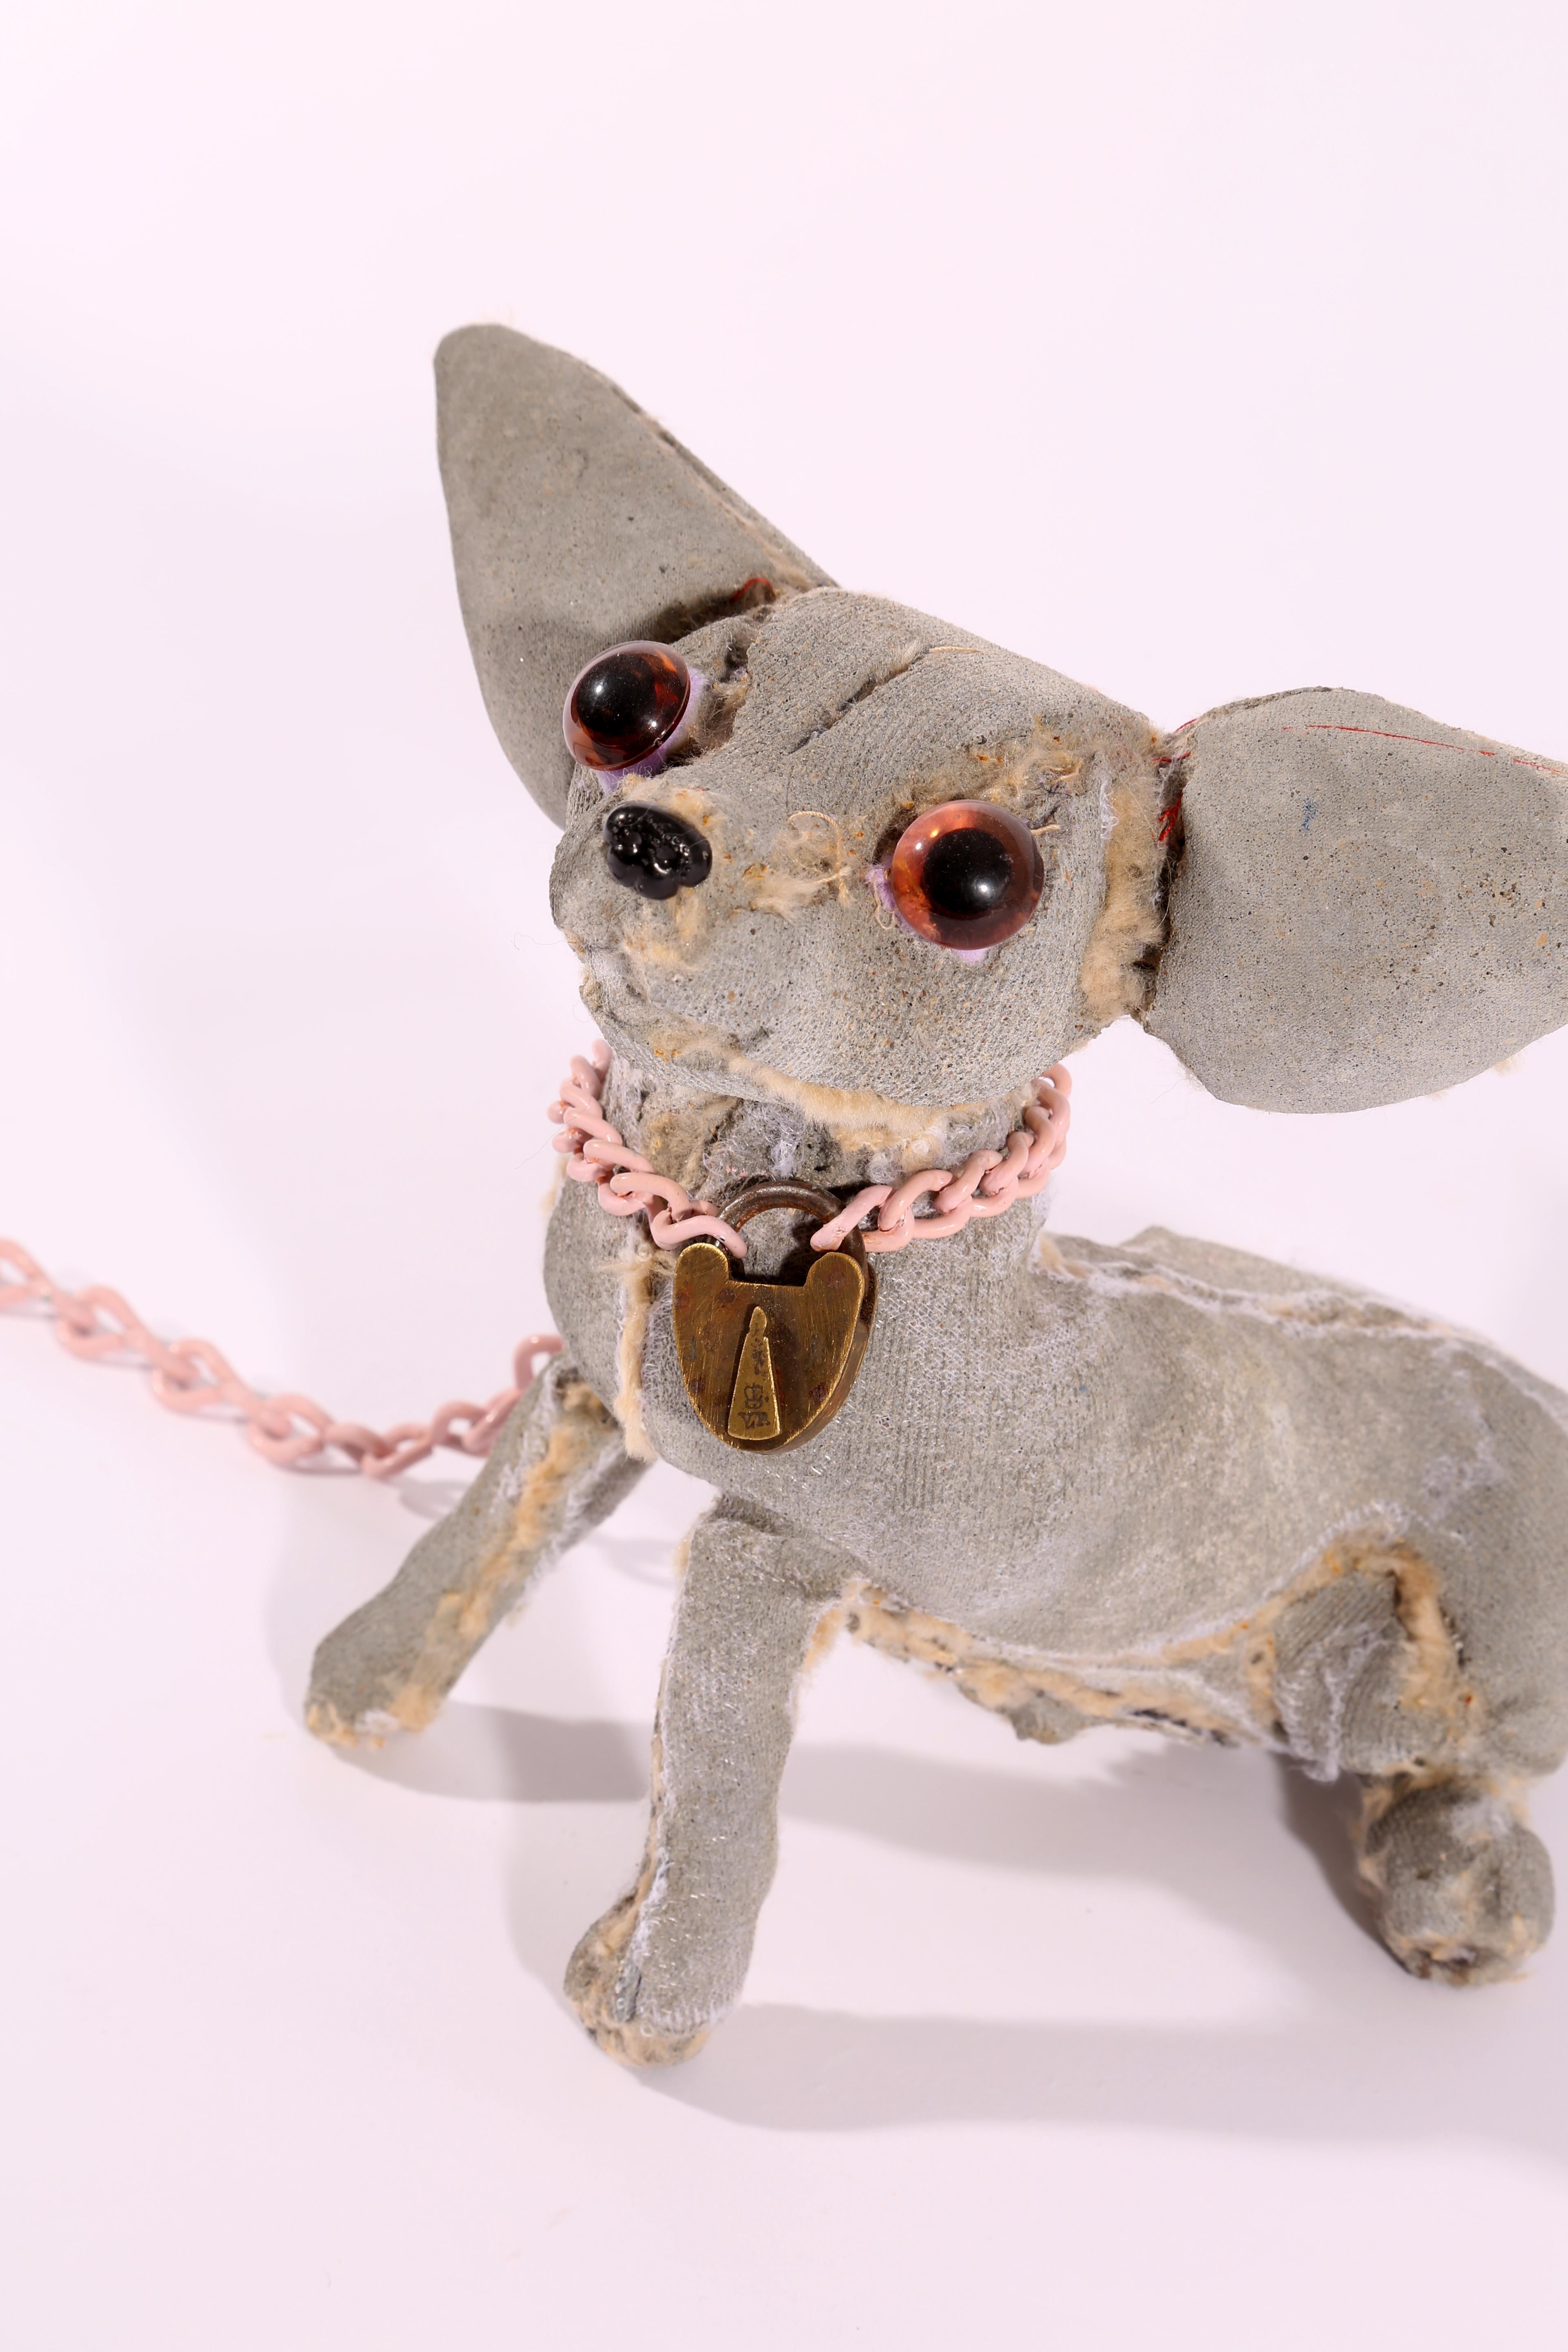 Ross Bonfanti
Chihuahua with pink chain, 2015
Concrete, mixed media